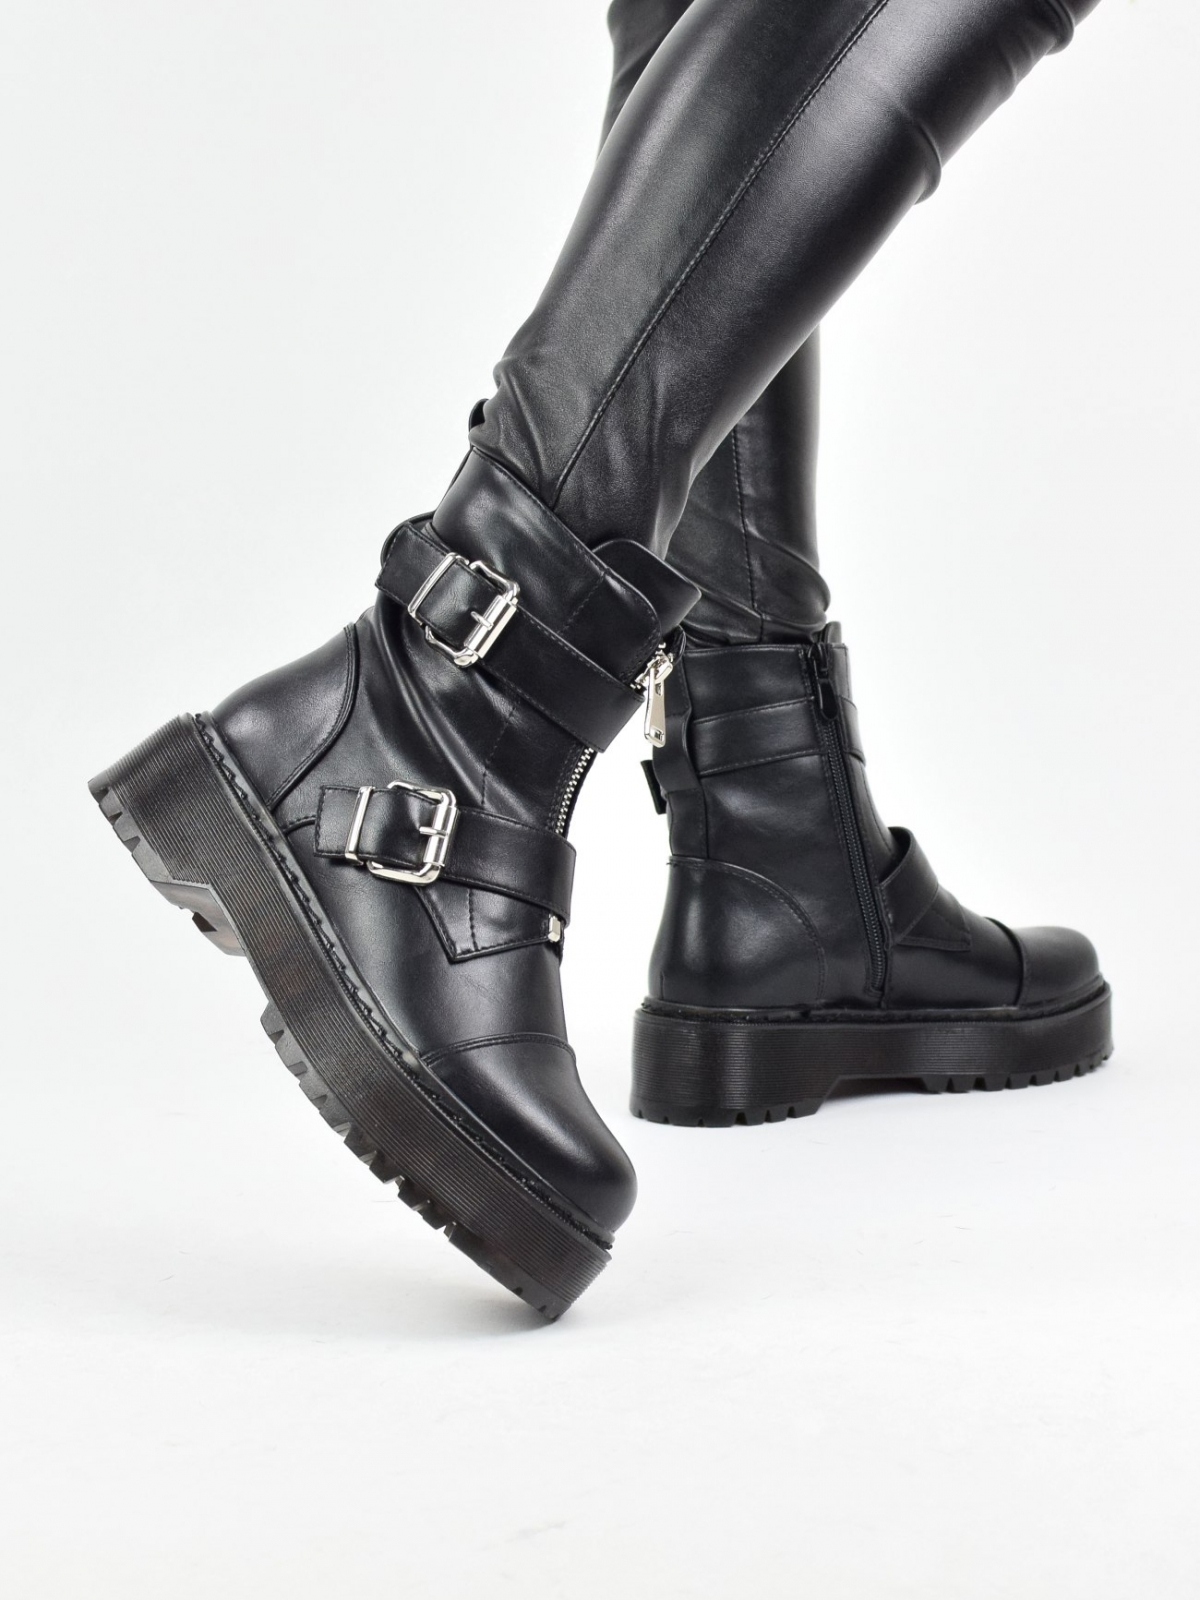 Chunky ankle boots with side metal details in black